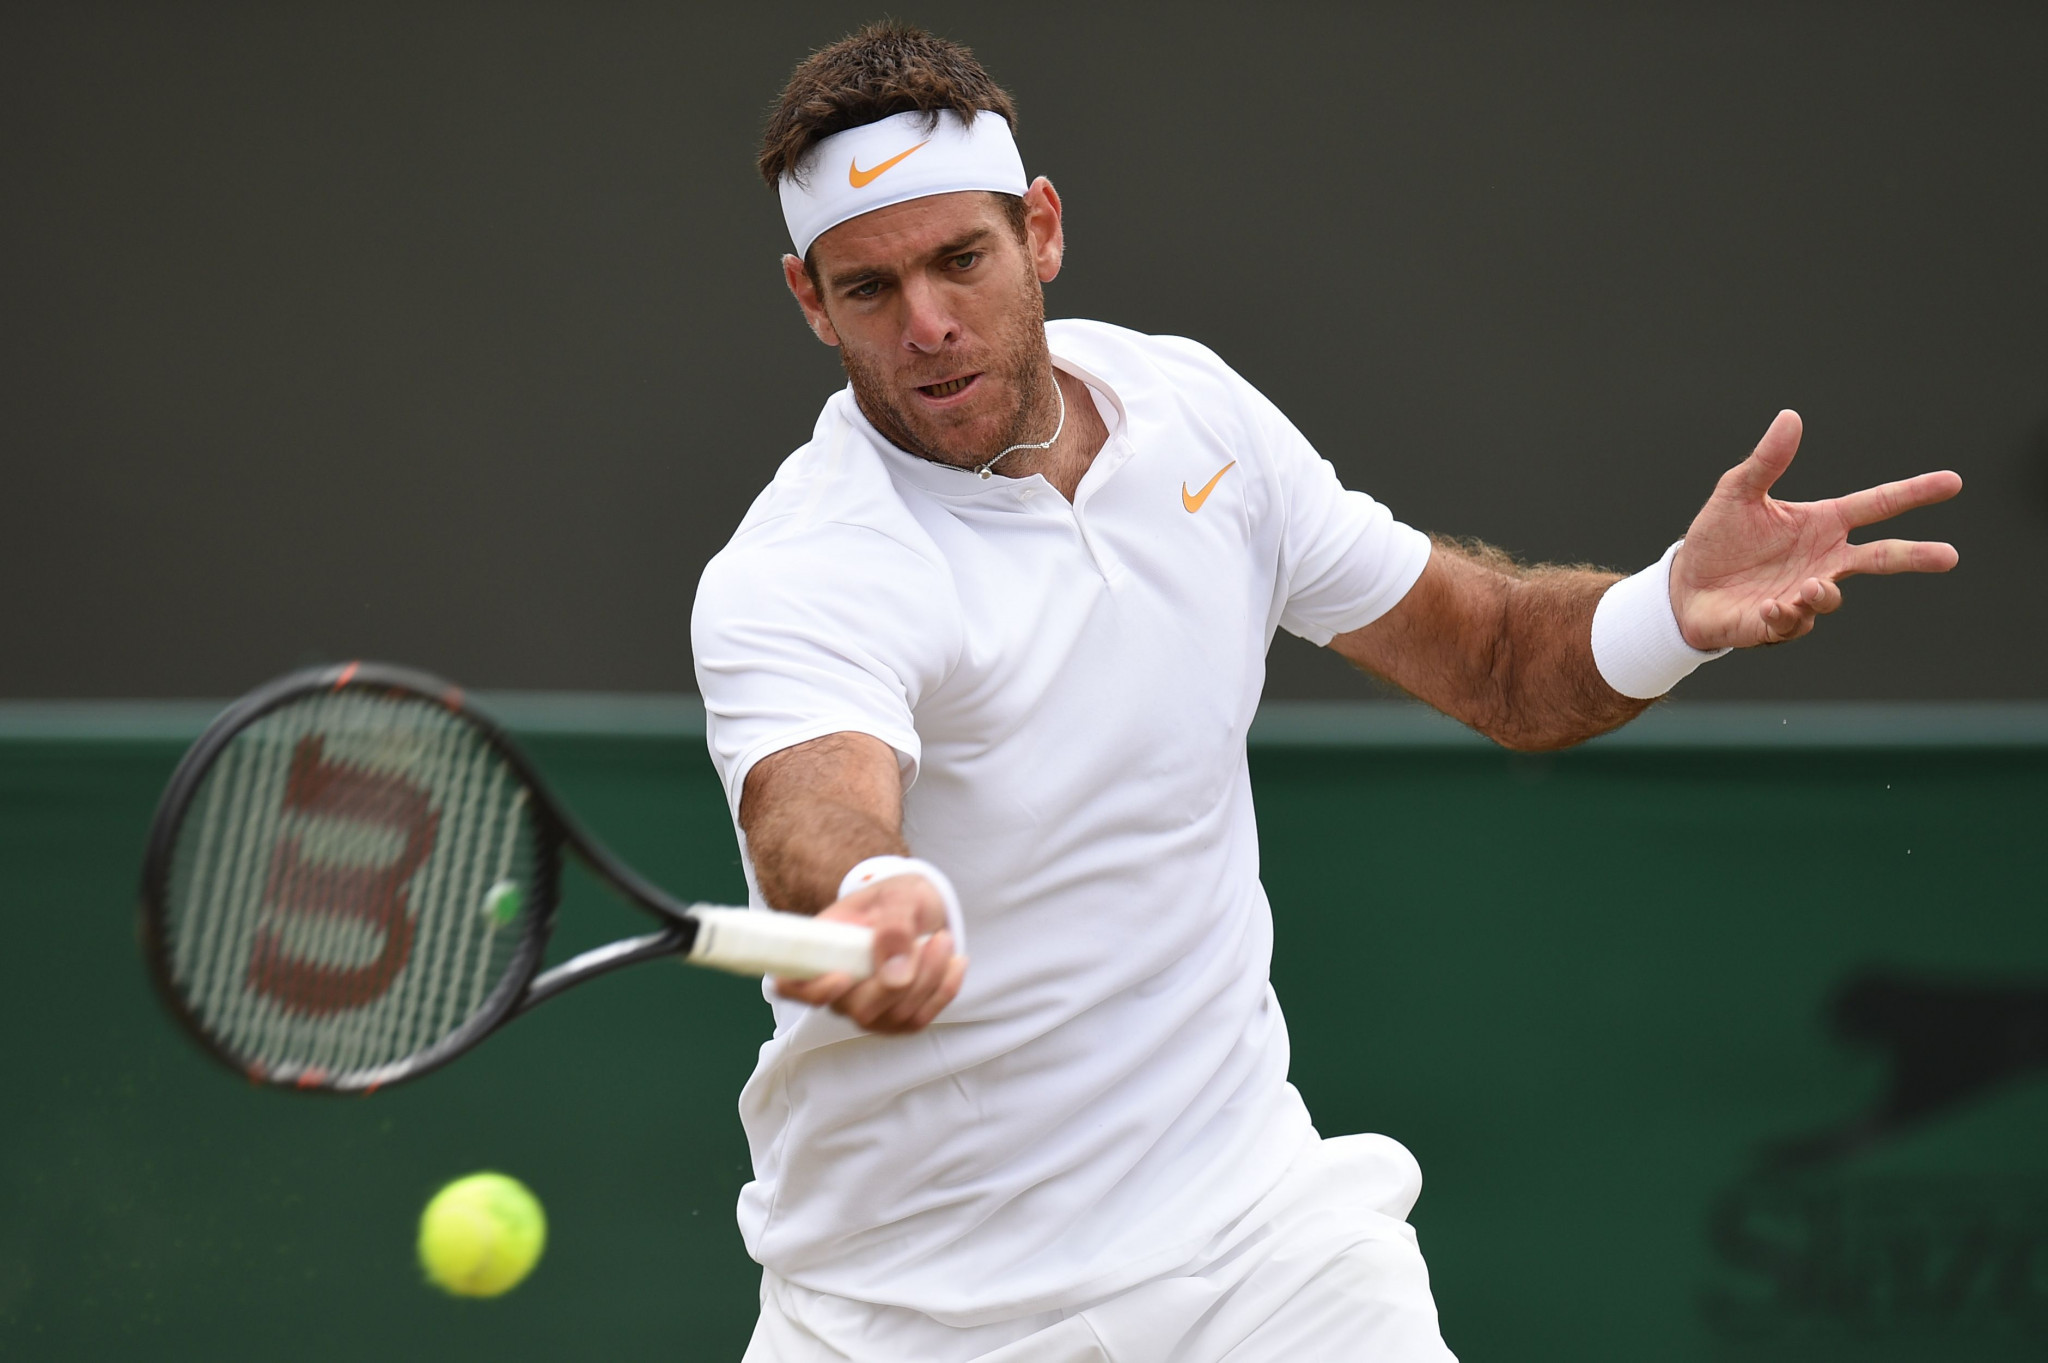 Argentina's Juan Martín del Potro is through to the men's singles quarter-finals, where he will face world number one Rafael Nadal ©Getty Images